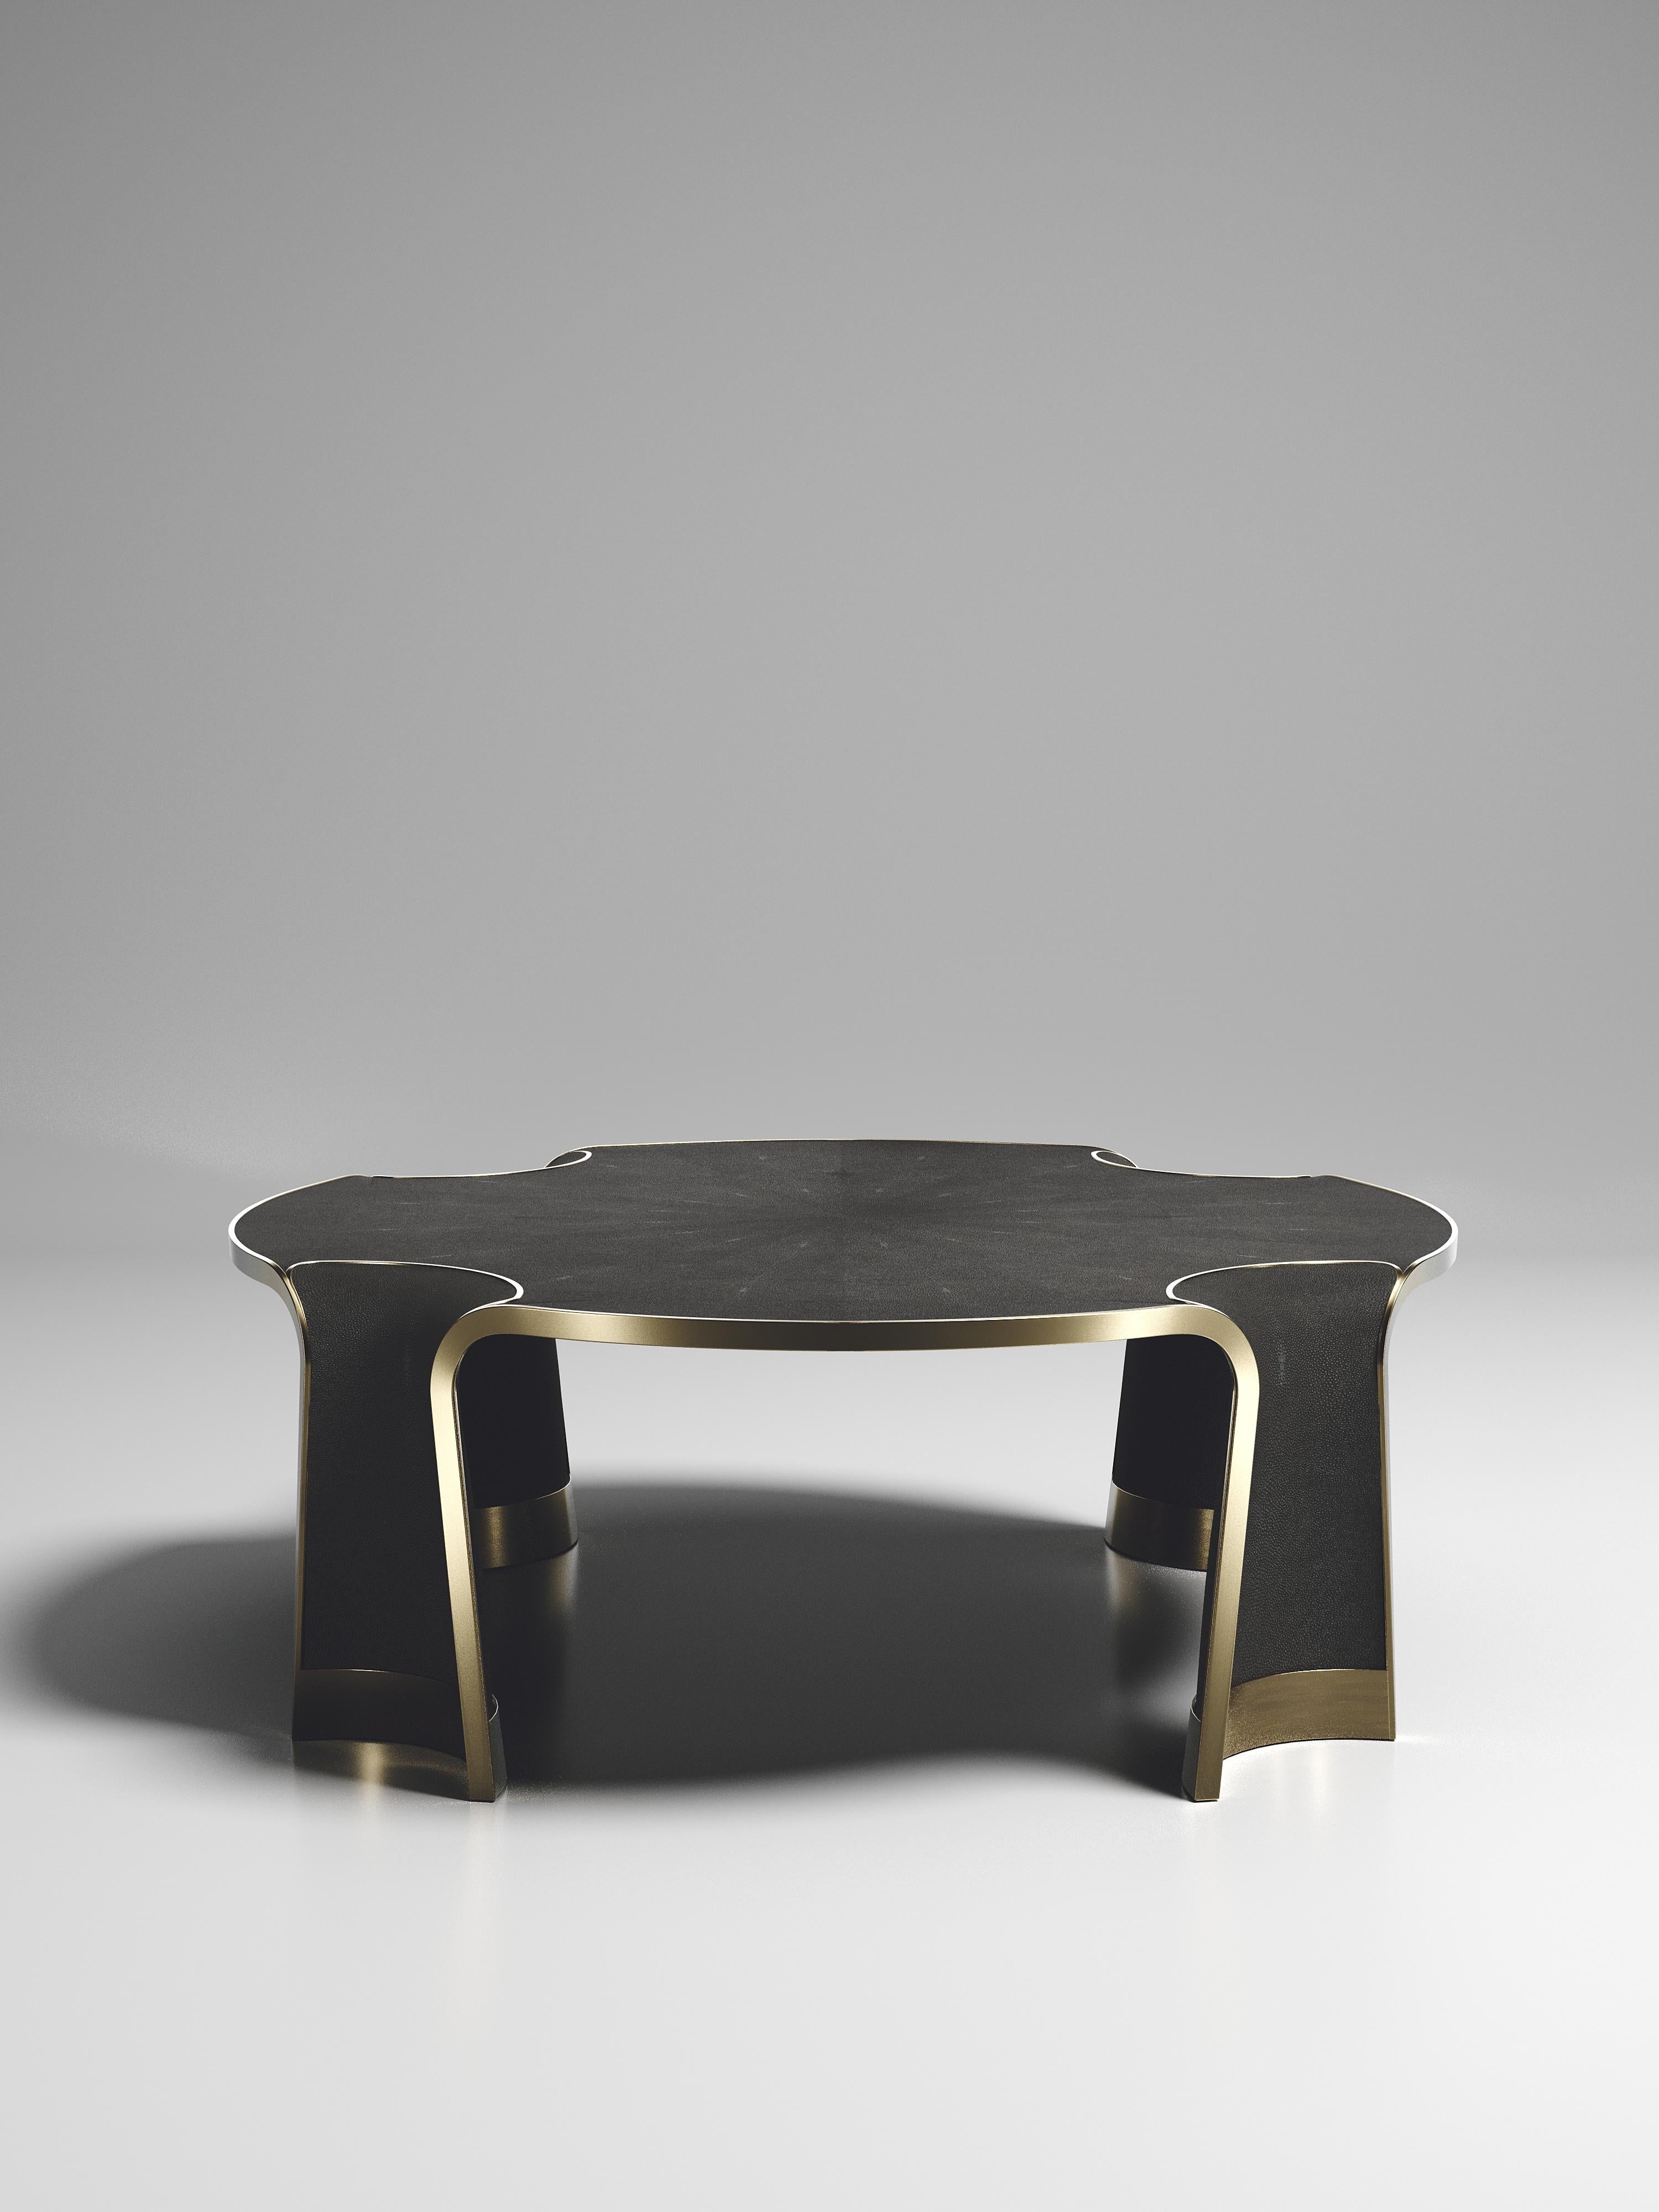 The Nymphea round coffee by R & Y Augousti in shagreen with bronze-patina brass details explores the brand's iconic DNA of bringing old world artisanal craft into a contemporary and utterly luxury feel. This table is done in a black shagreen finish